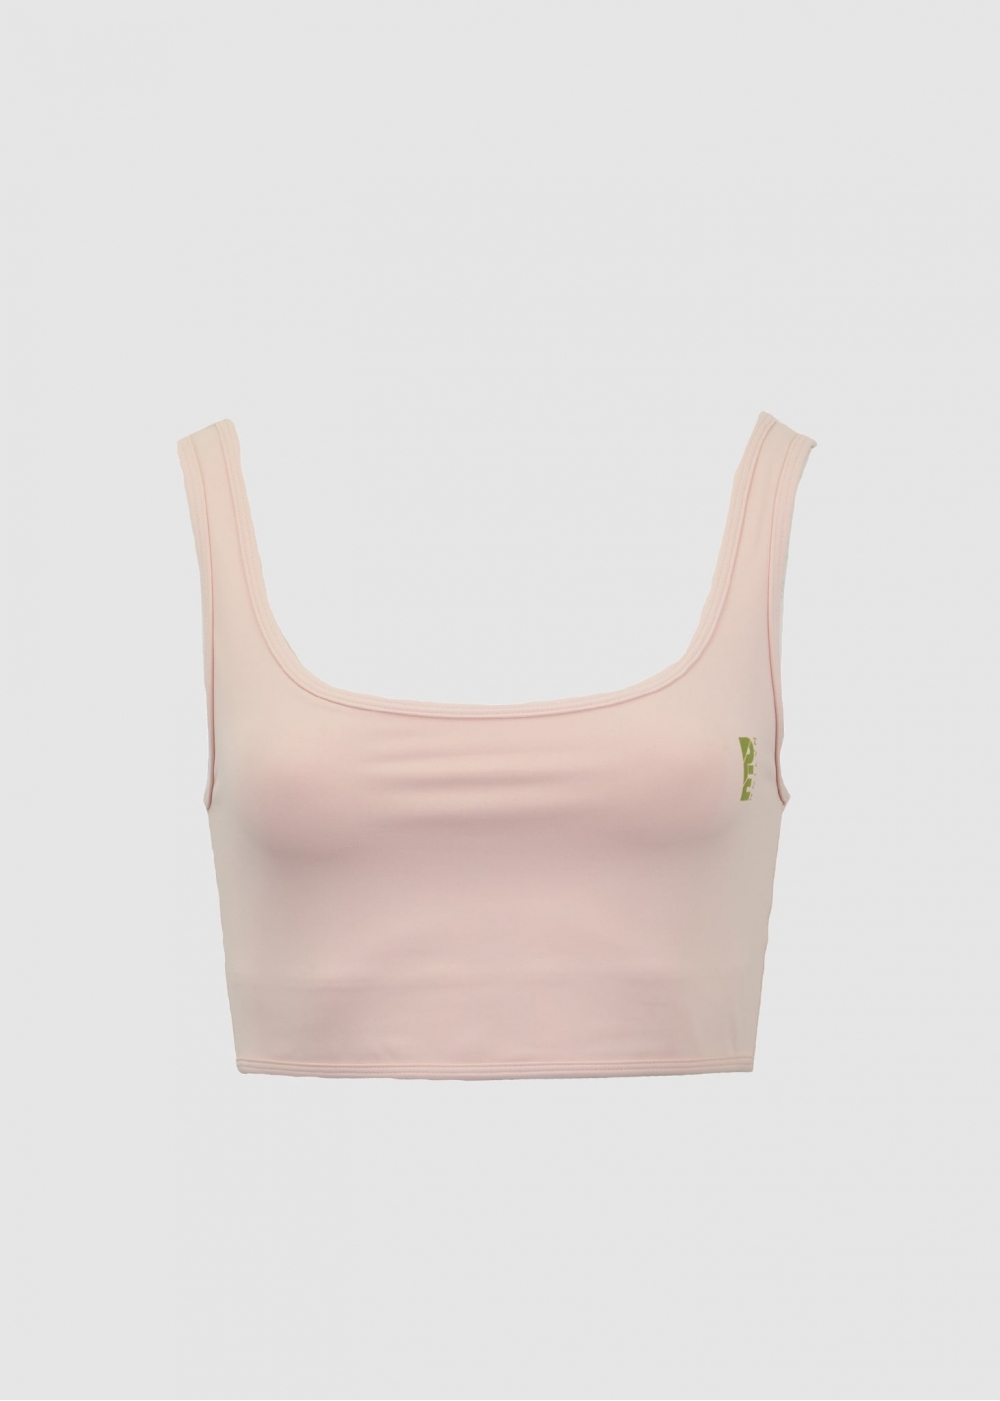 pe-nation-womens-all-around-sports-bra-in-candy